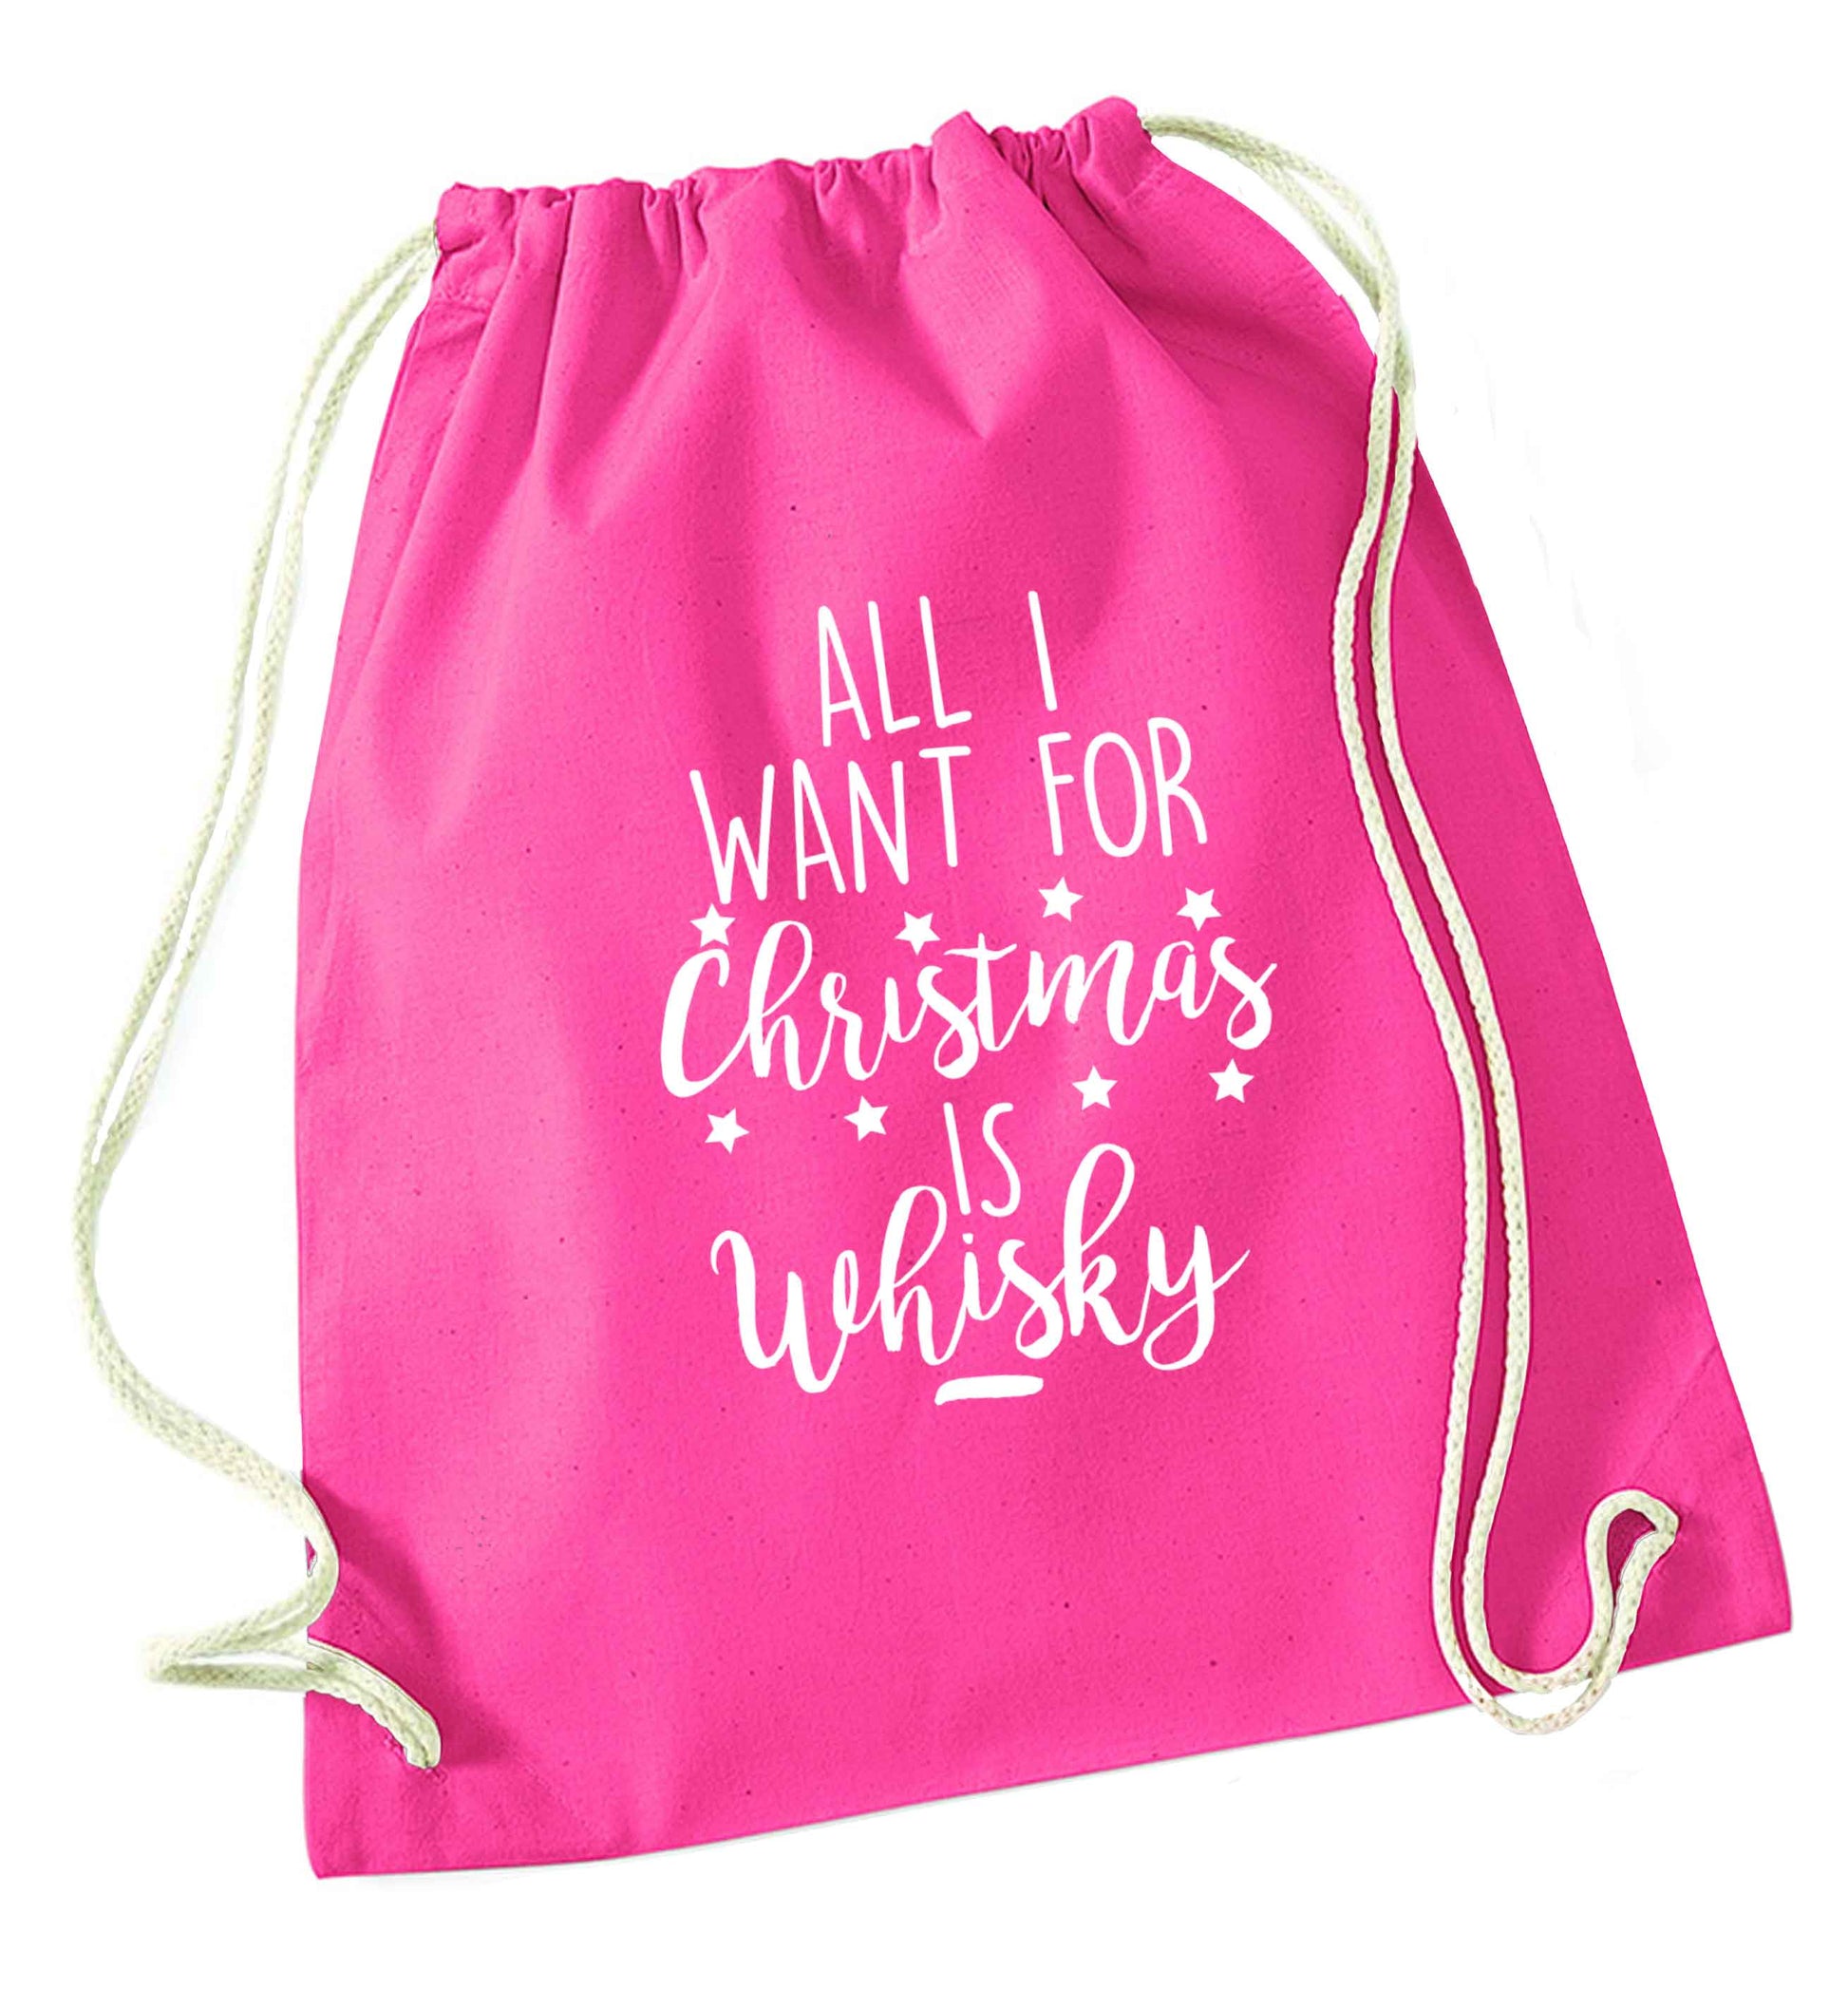 All I want for Christmas is whisky pink drawstring bag